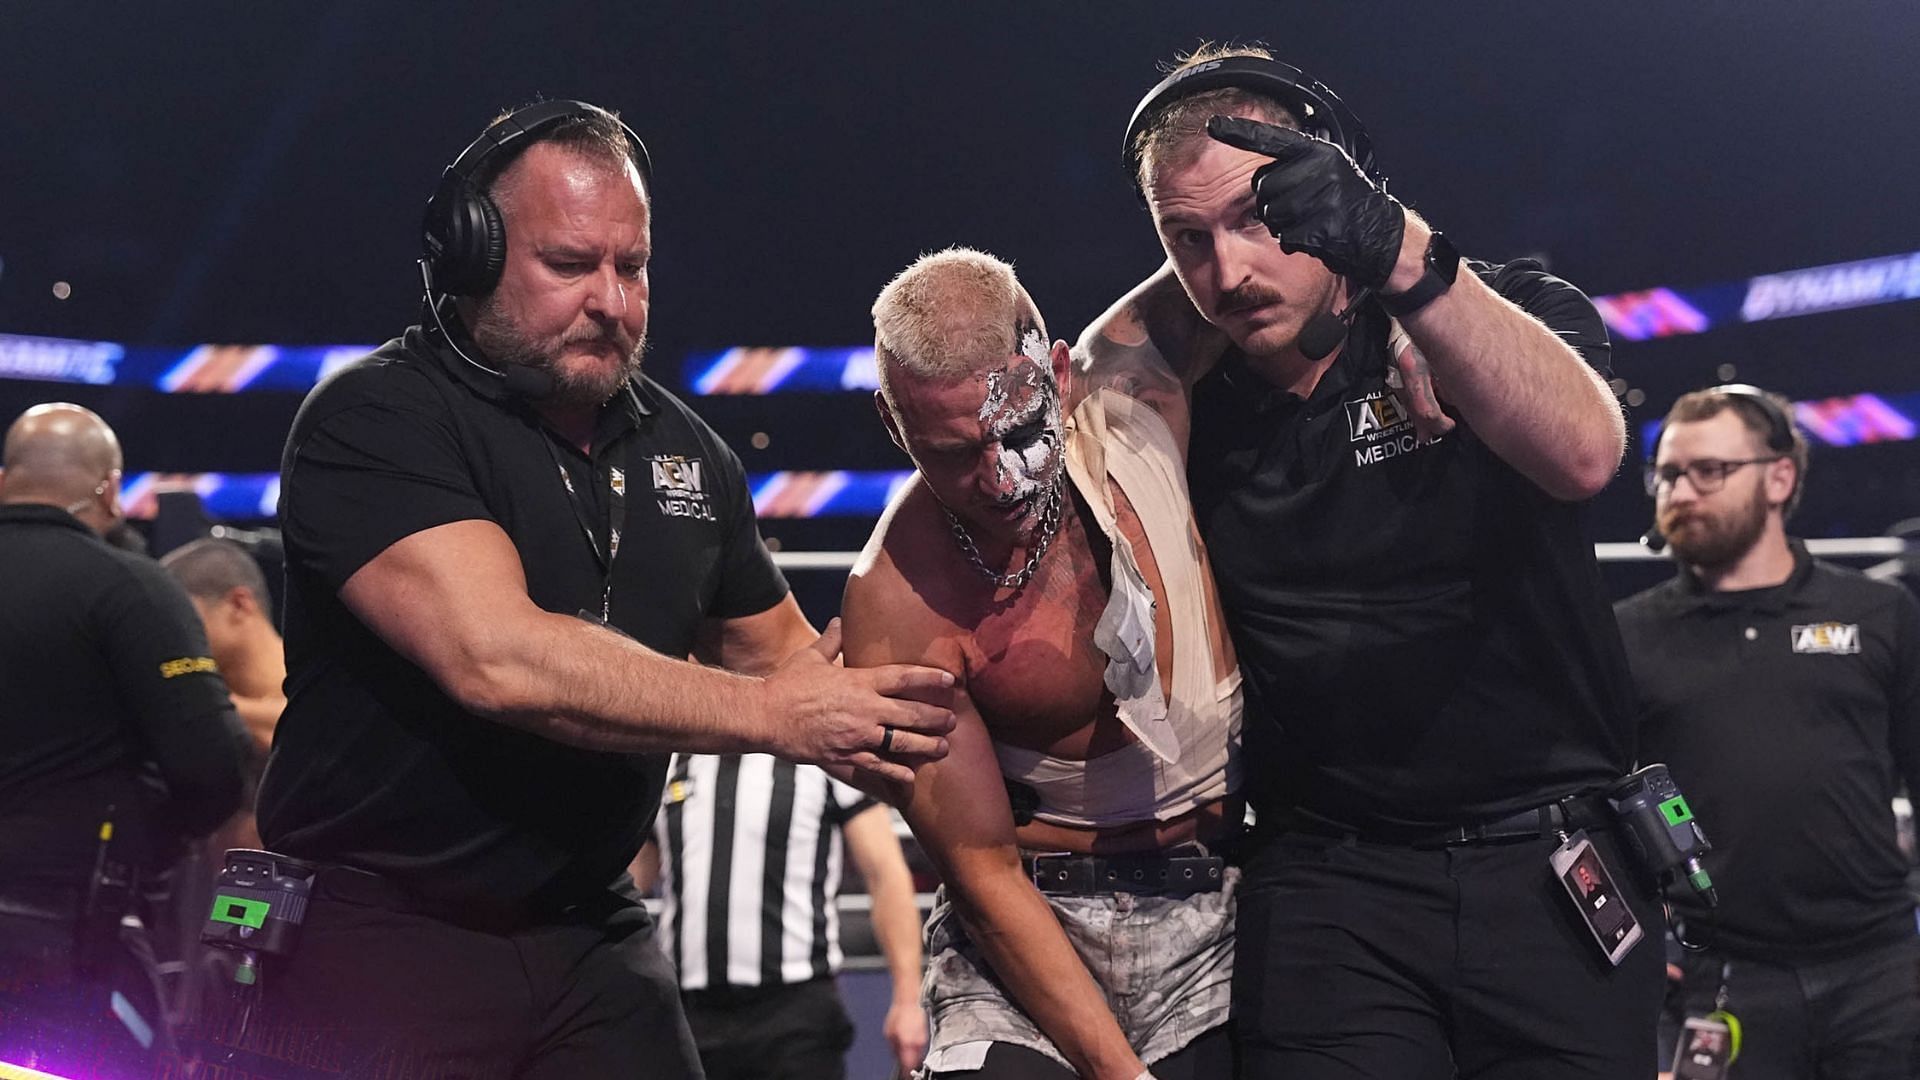 Darby Allin is a former TNT Champion [Photo courtesy of AEW